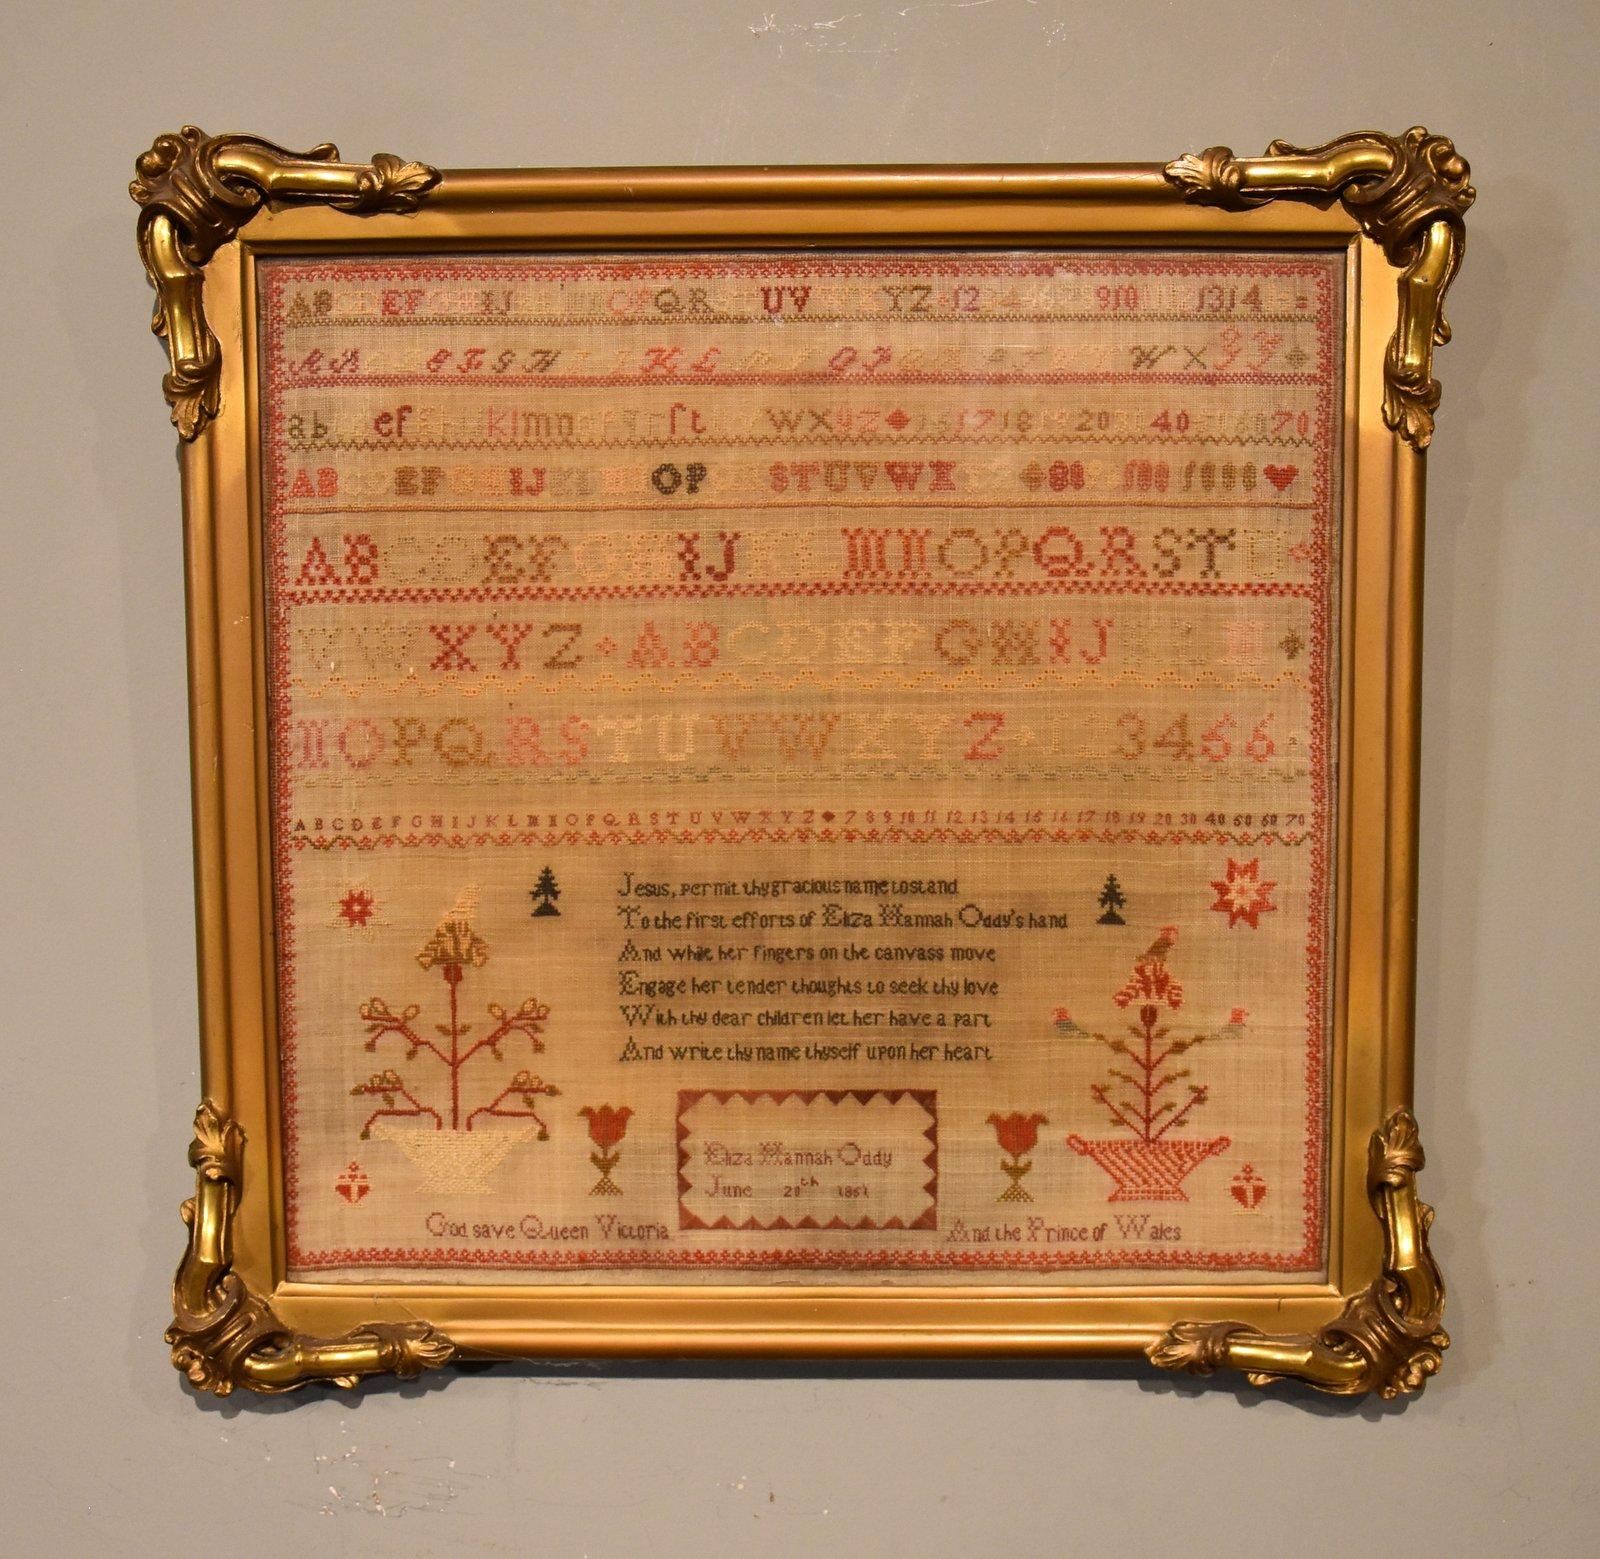 A 19th Century Sampler by  Eliza Hanna Oddy June 20th 1861 in original frame

Dimensions framed:
height 15" x width 16"

All of the items that we advertise for sale have been as accurately described as possible and are in excellent condition, unless